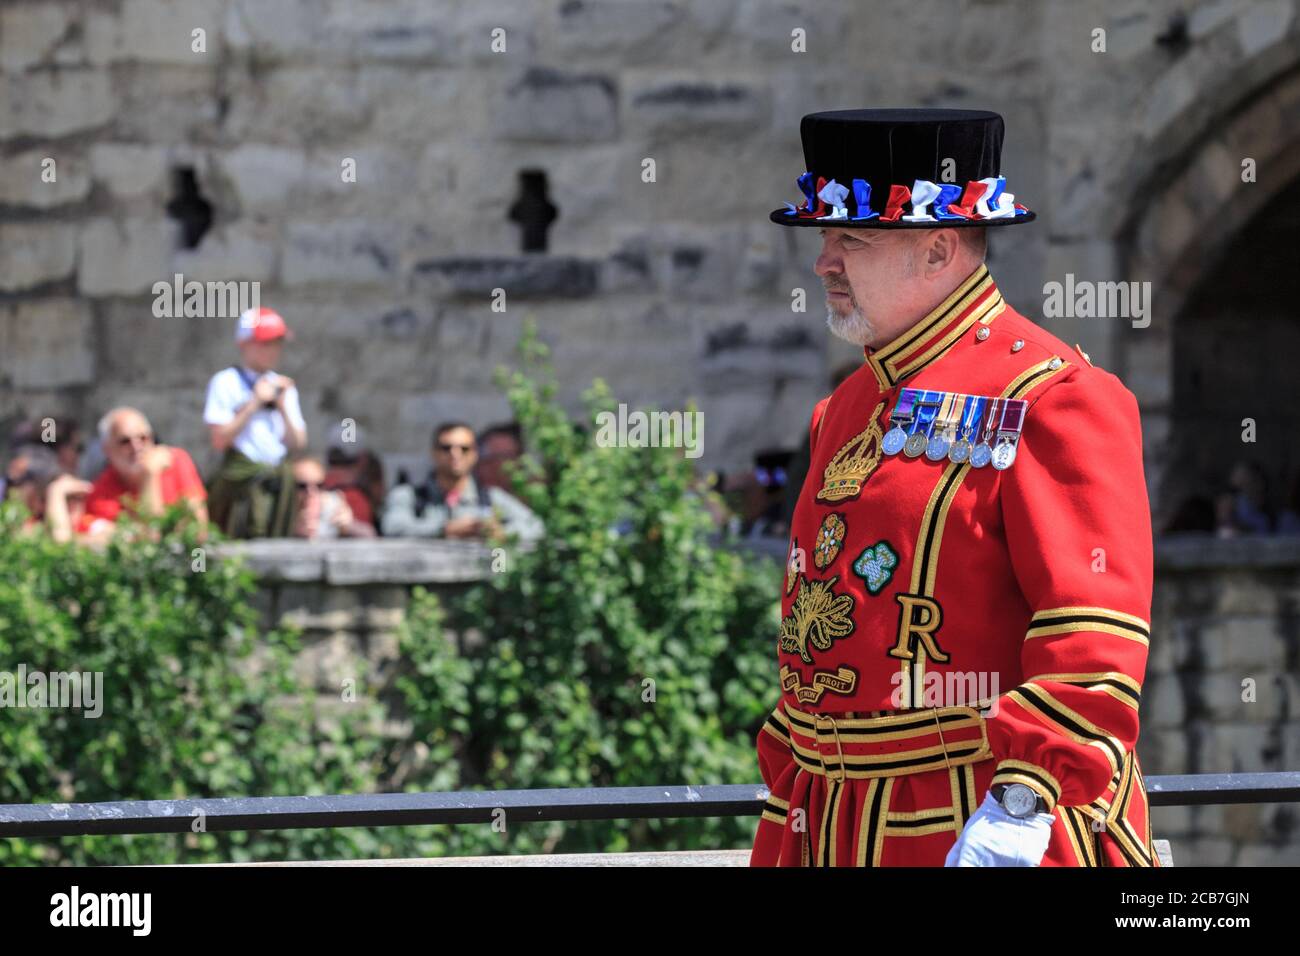 A yeoman warder, commonly known as a Beefeater, at the Tower of London, in ceremonial uniform during gun salute, London, England Stock Photo